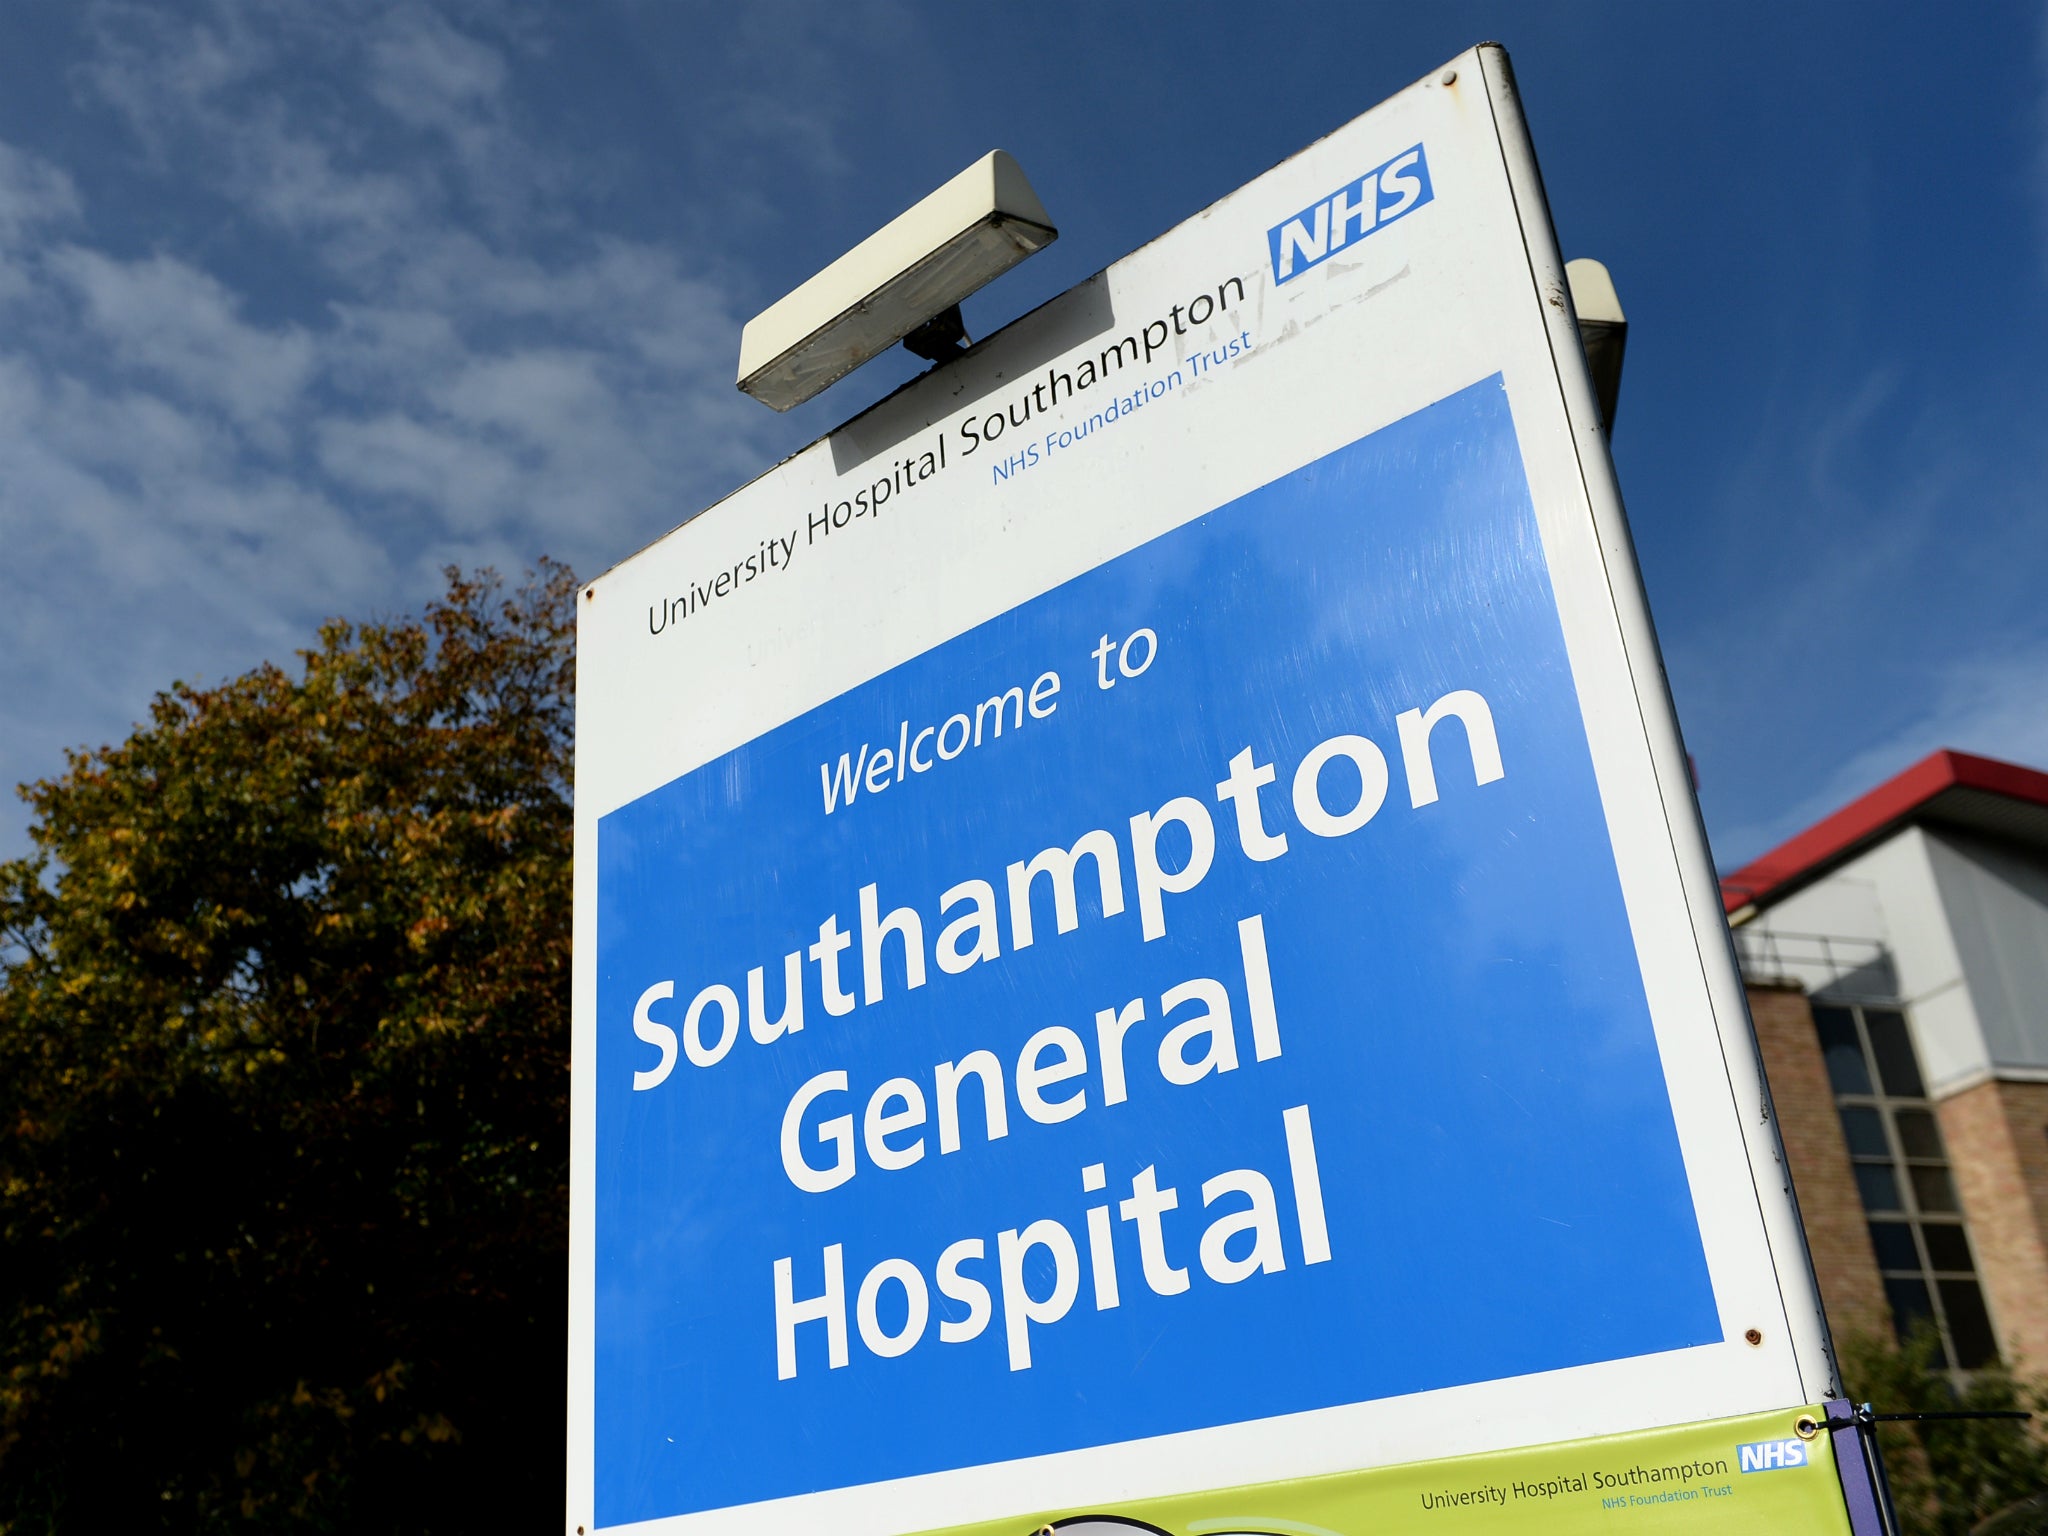 Eight wards and forty beds are now affected at the hospital